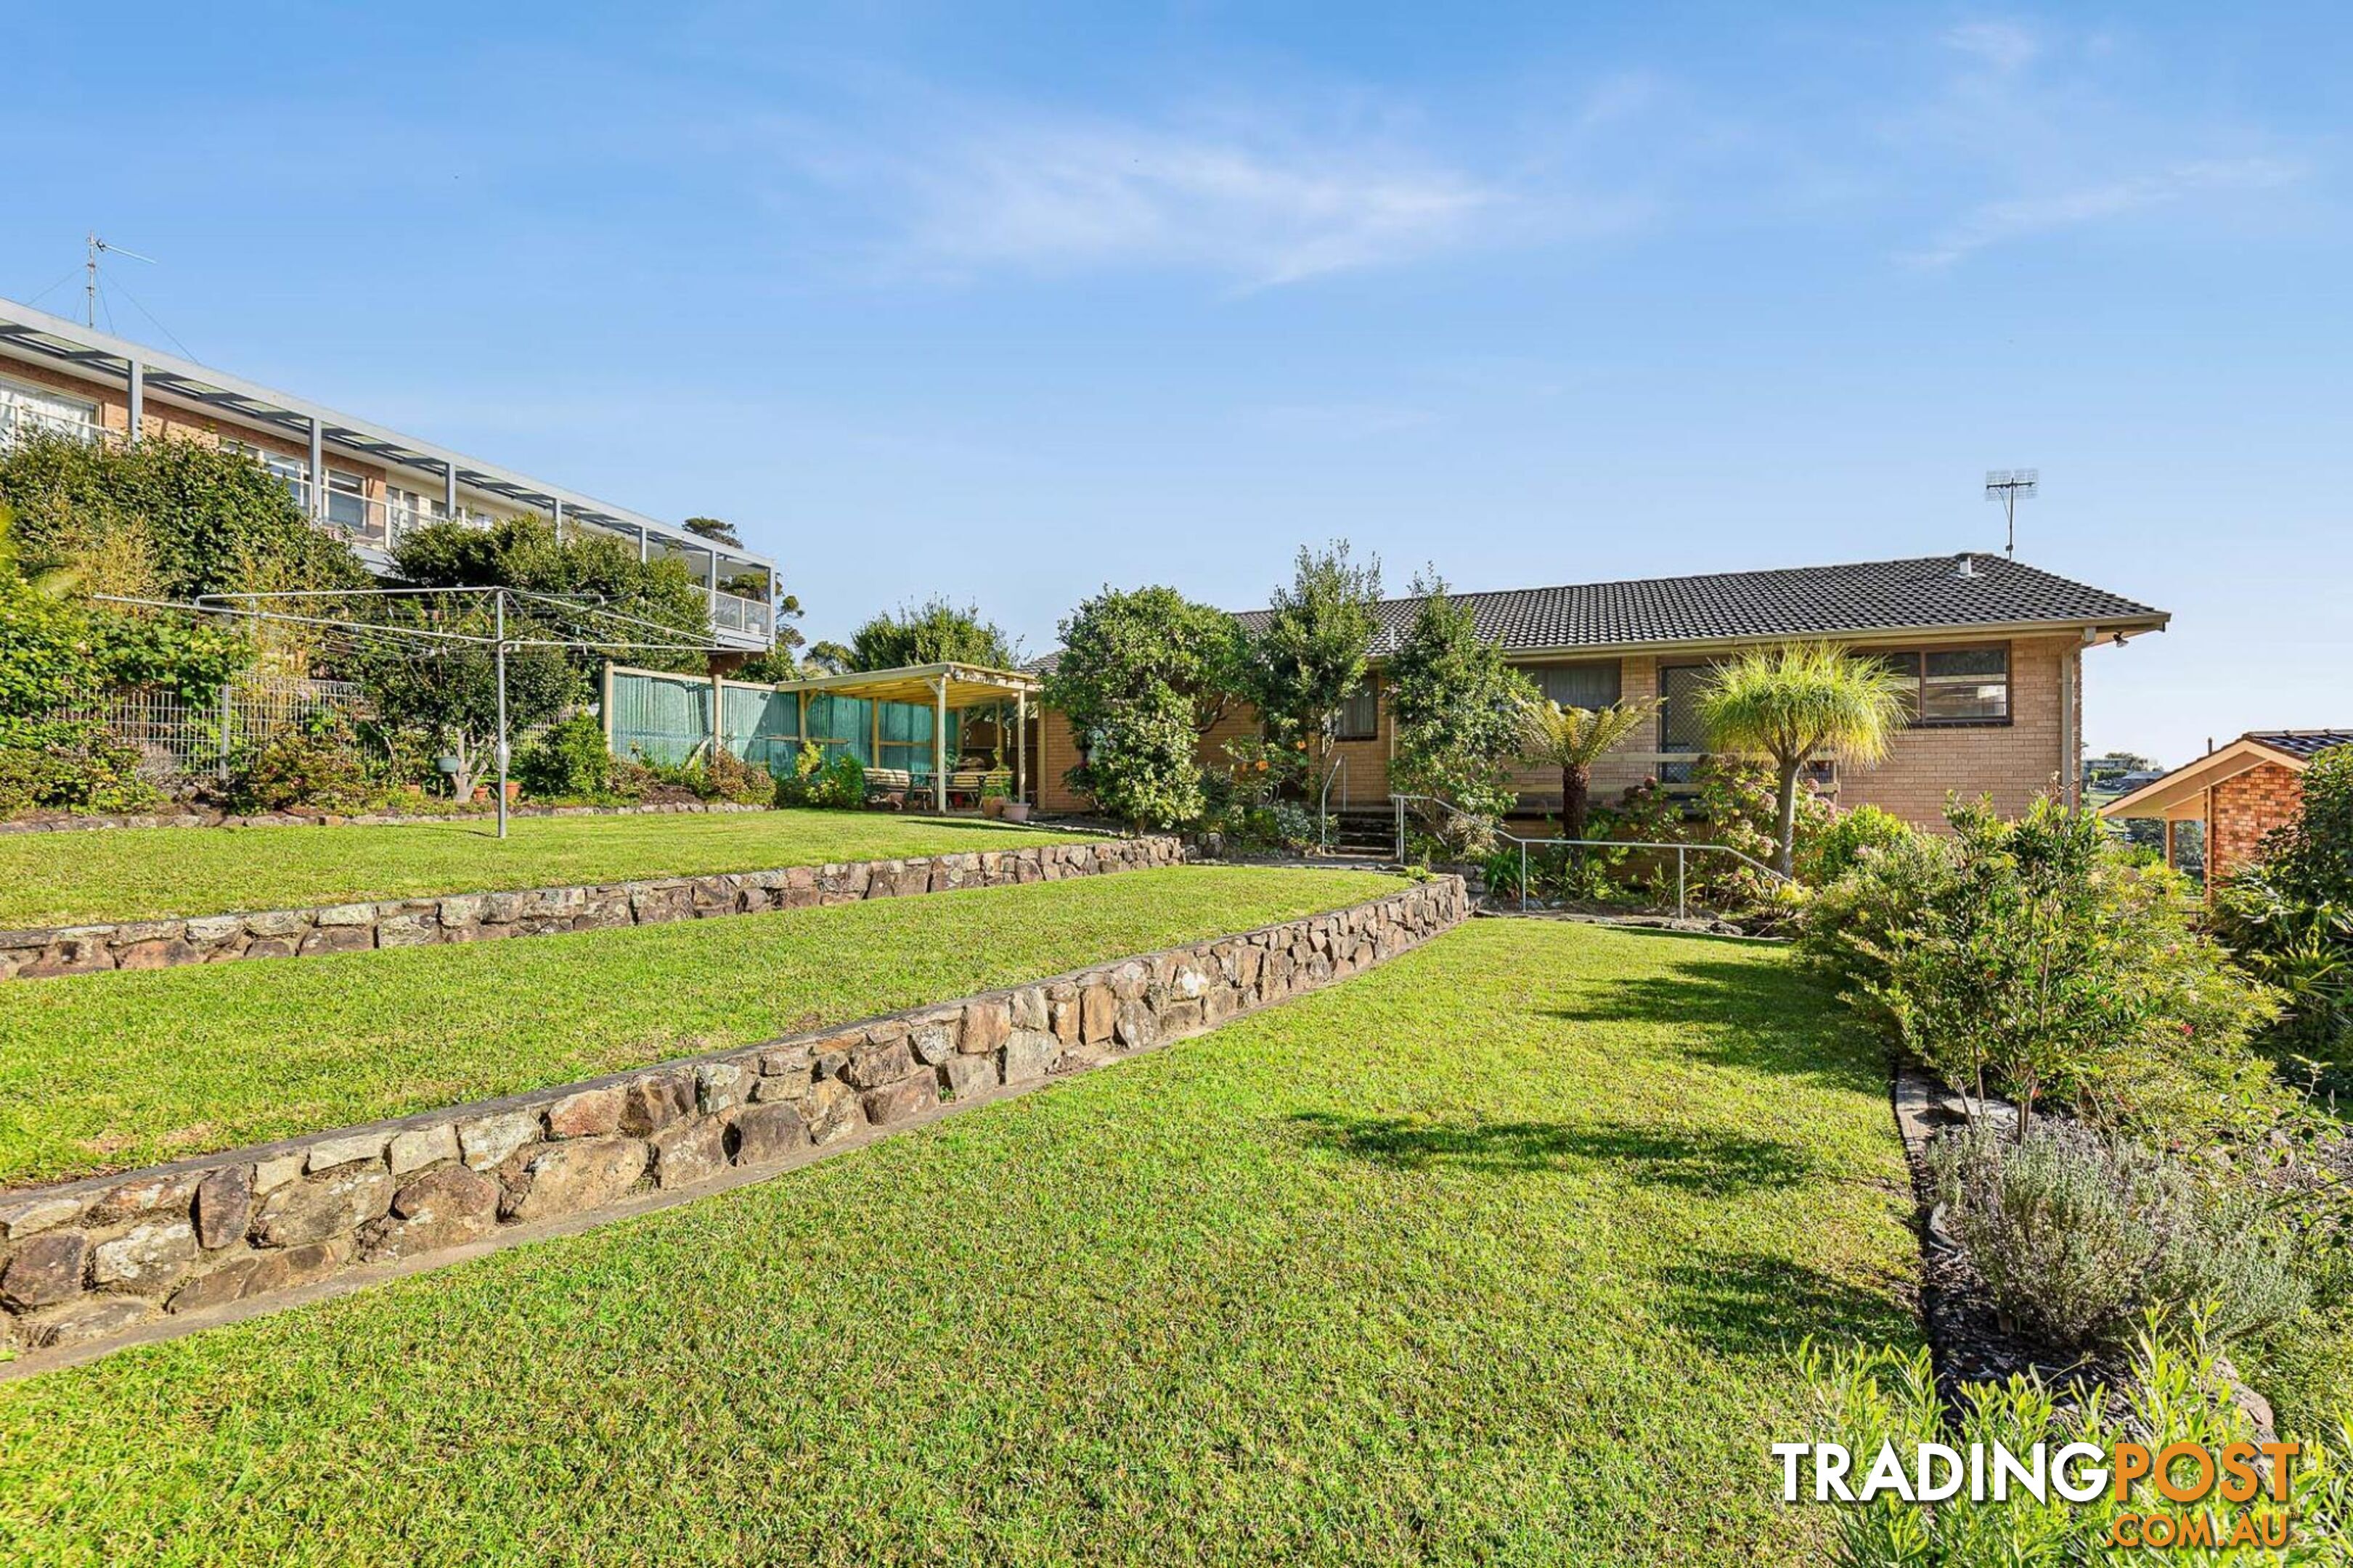 22 Warbler Crescent NORTH NAROOMA NSW 2546